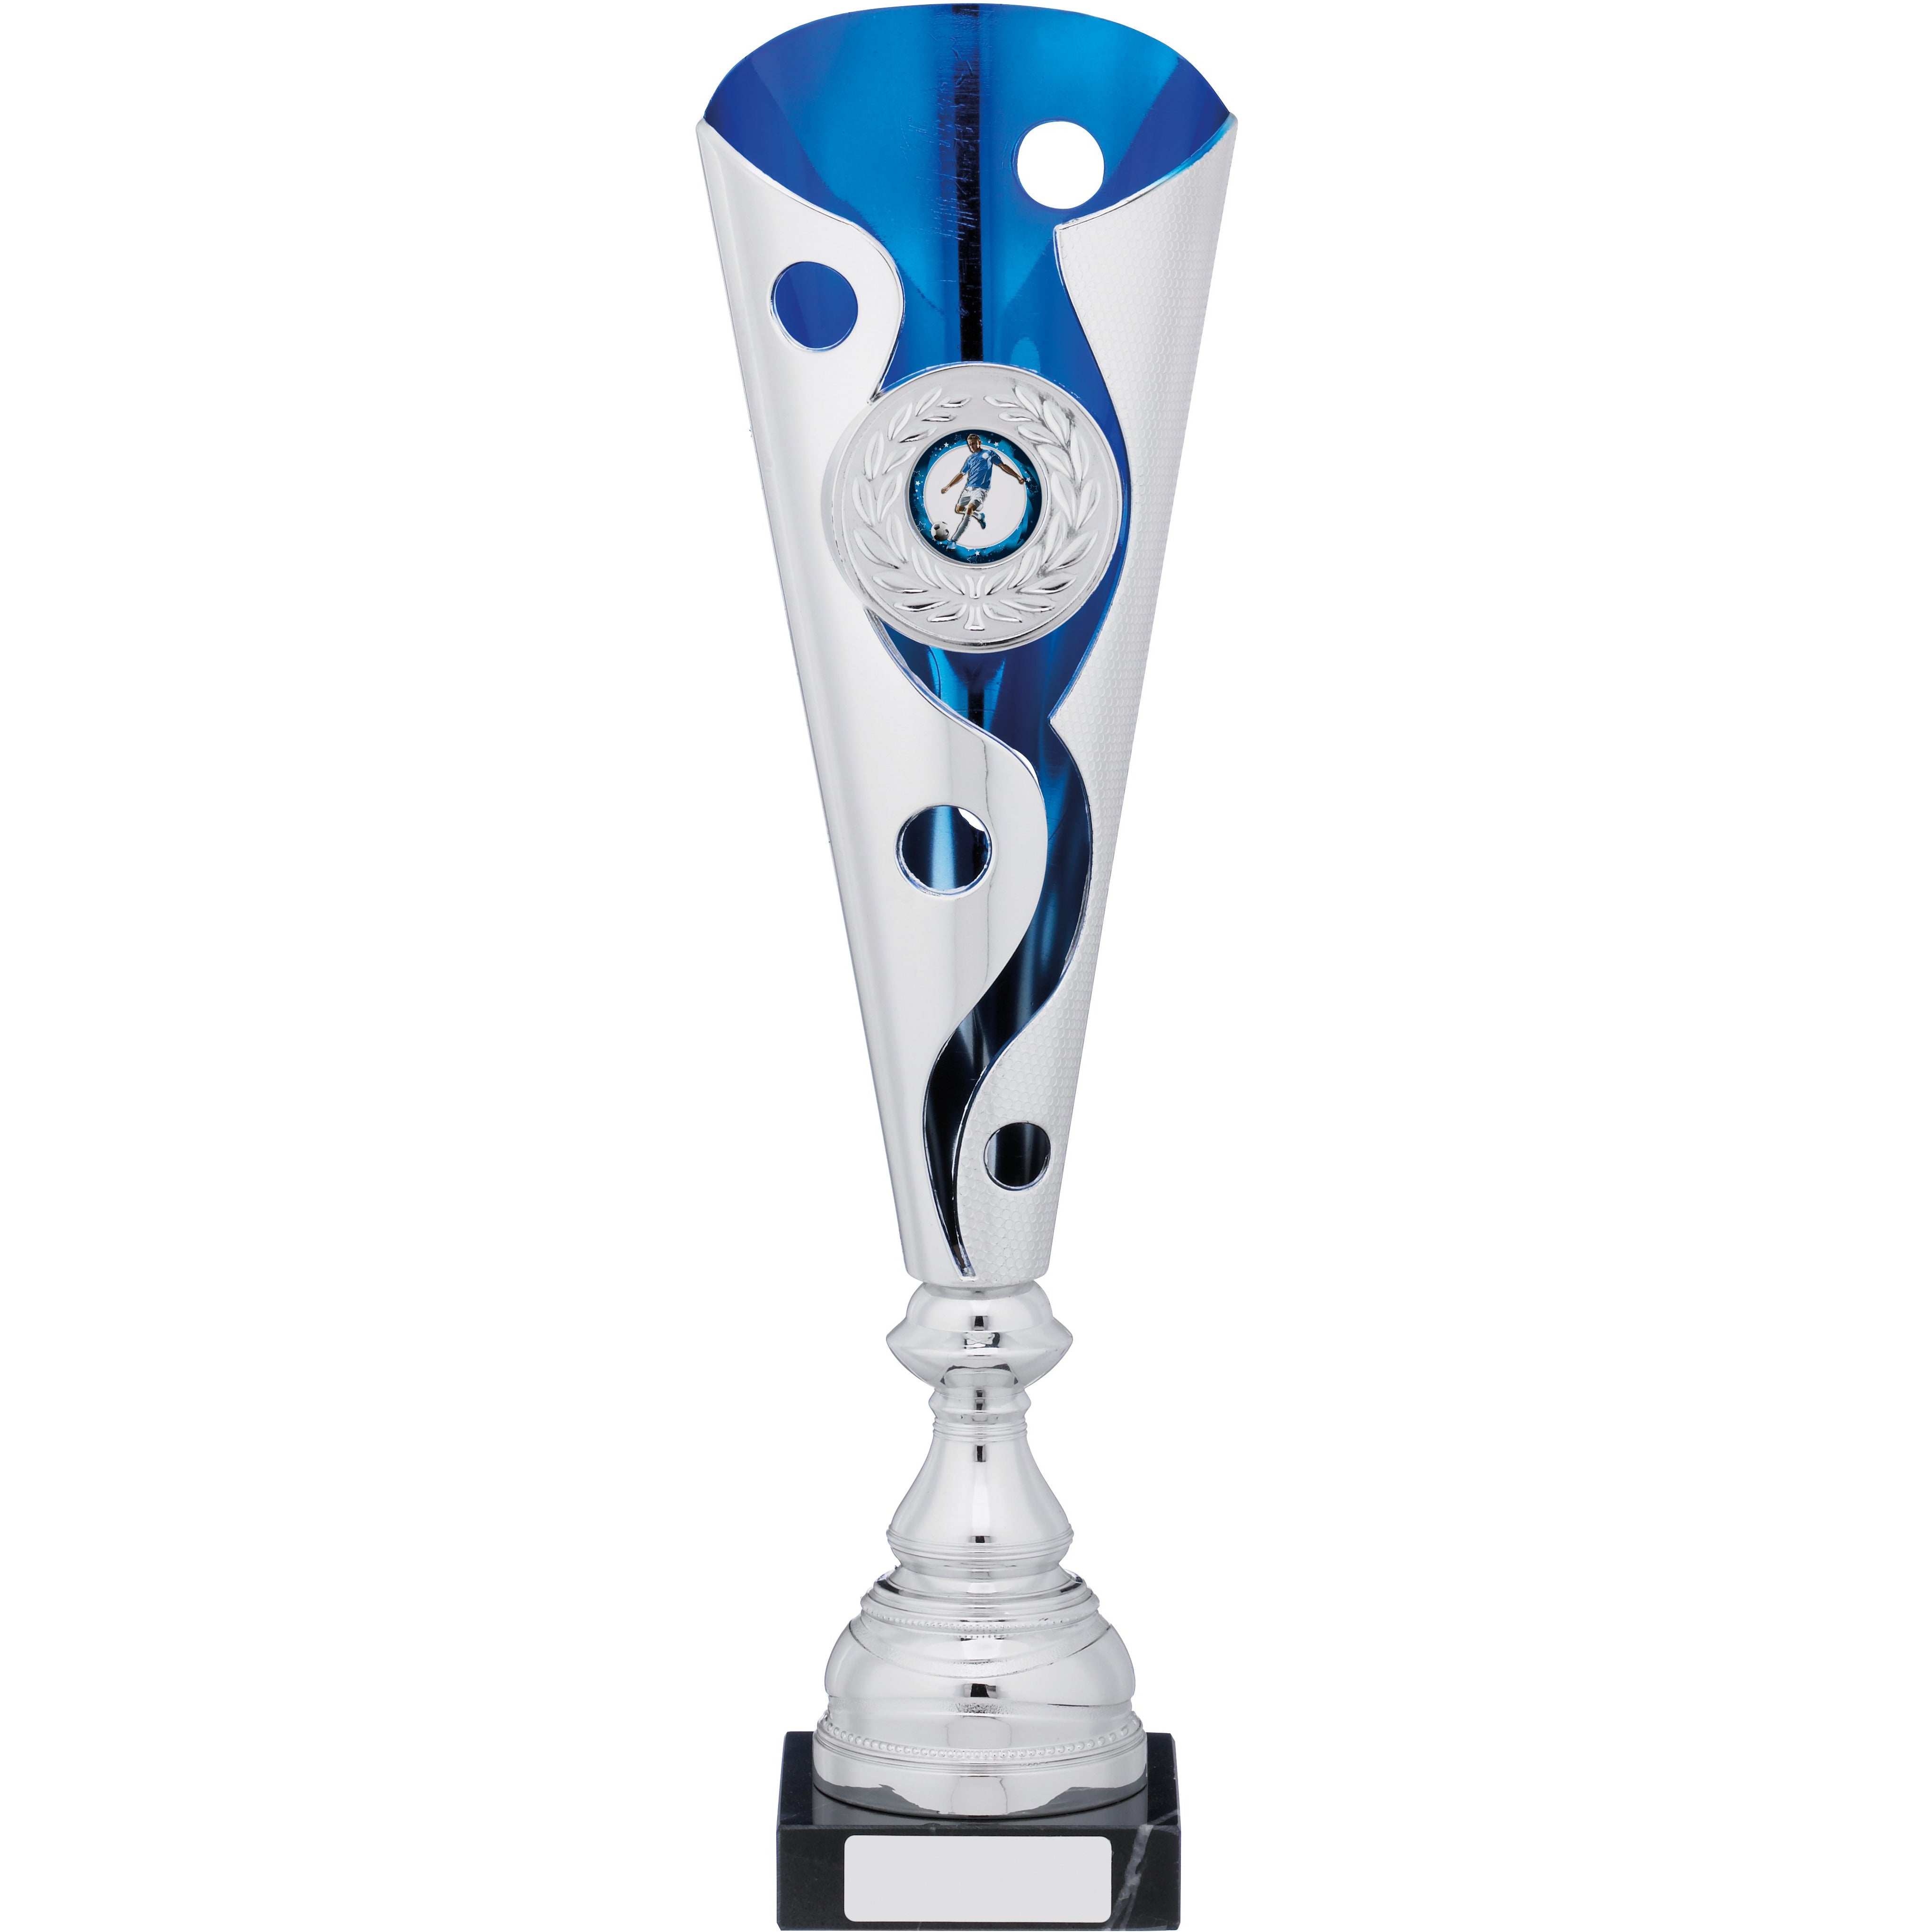 Silver & Blue Modern Trophy Cup with Circles and Swirl Cutout